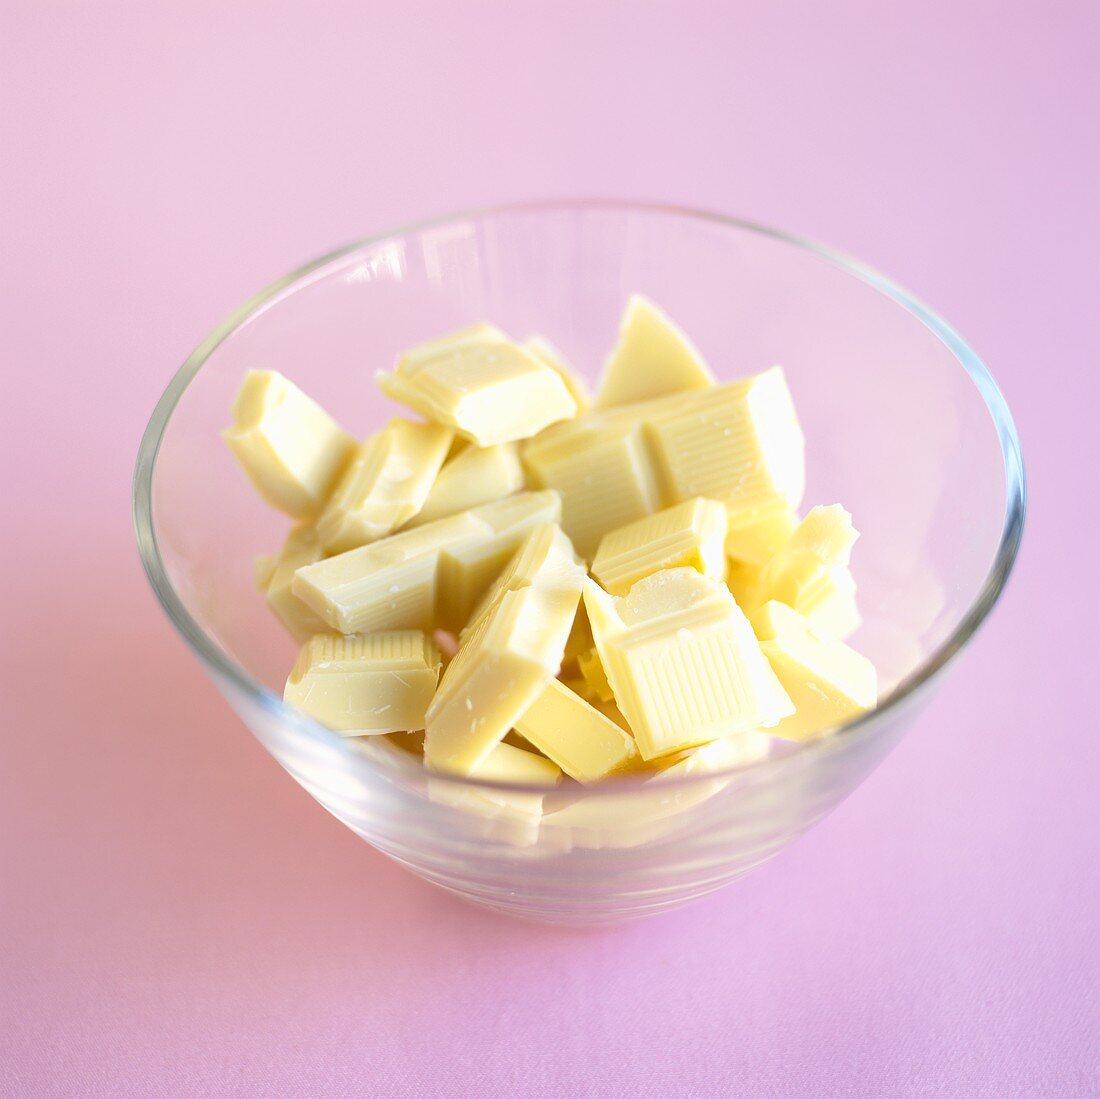 Broken white chocolate in a glass bowl